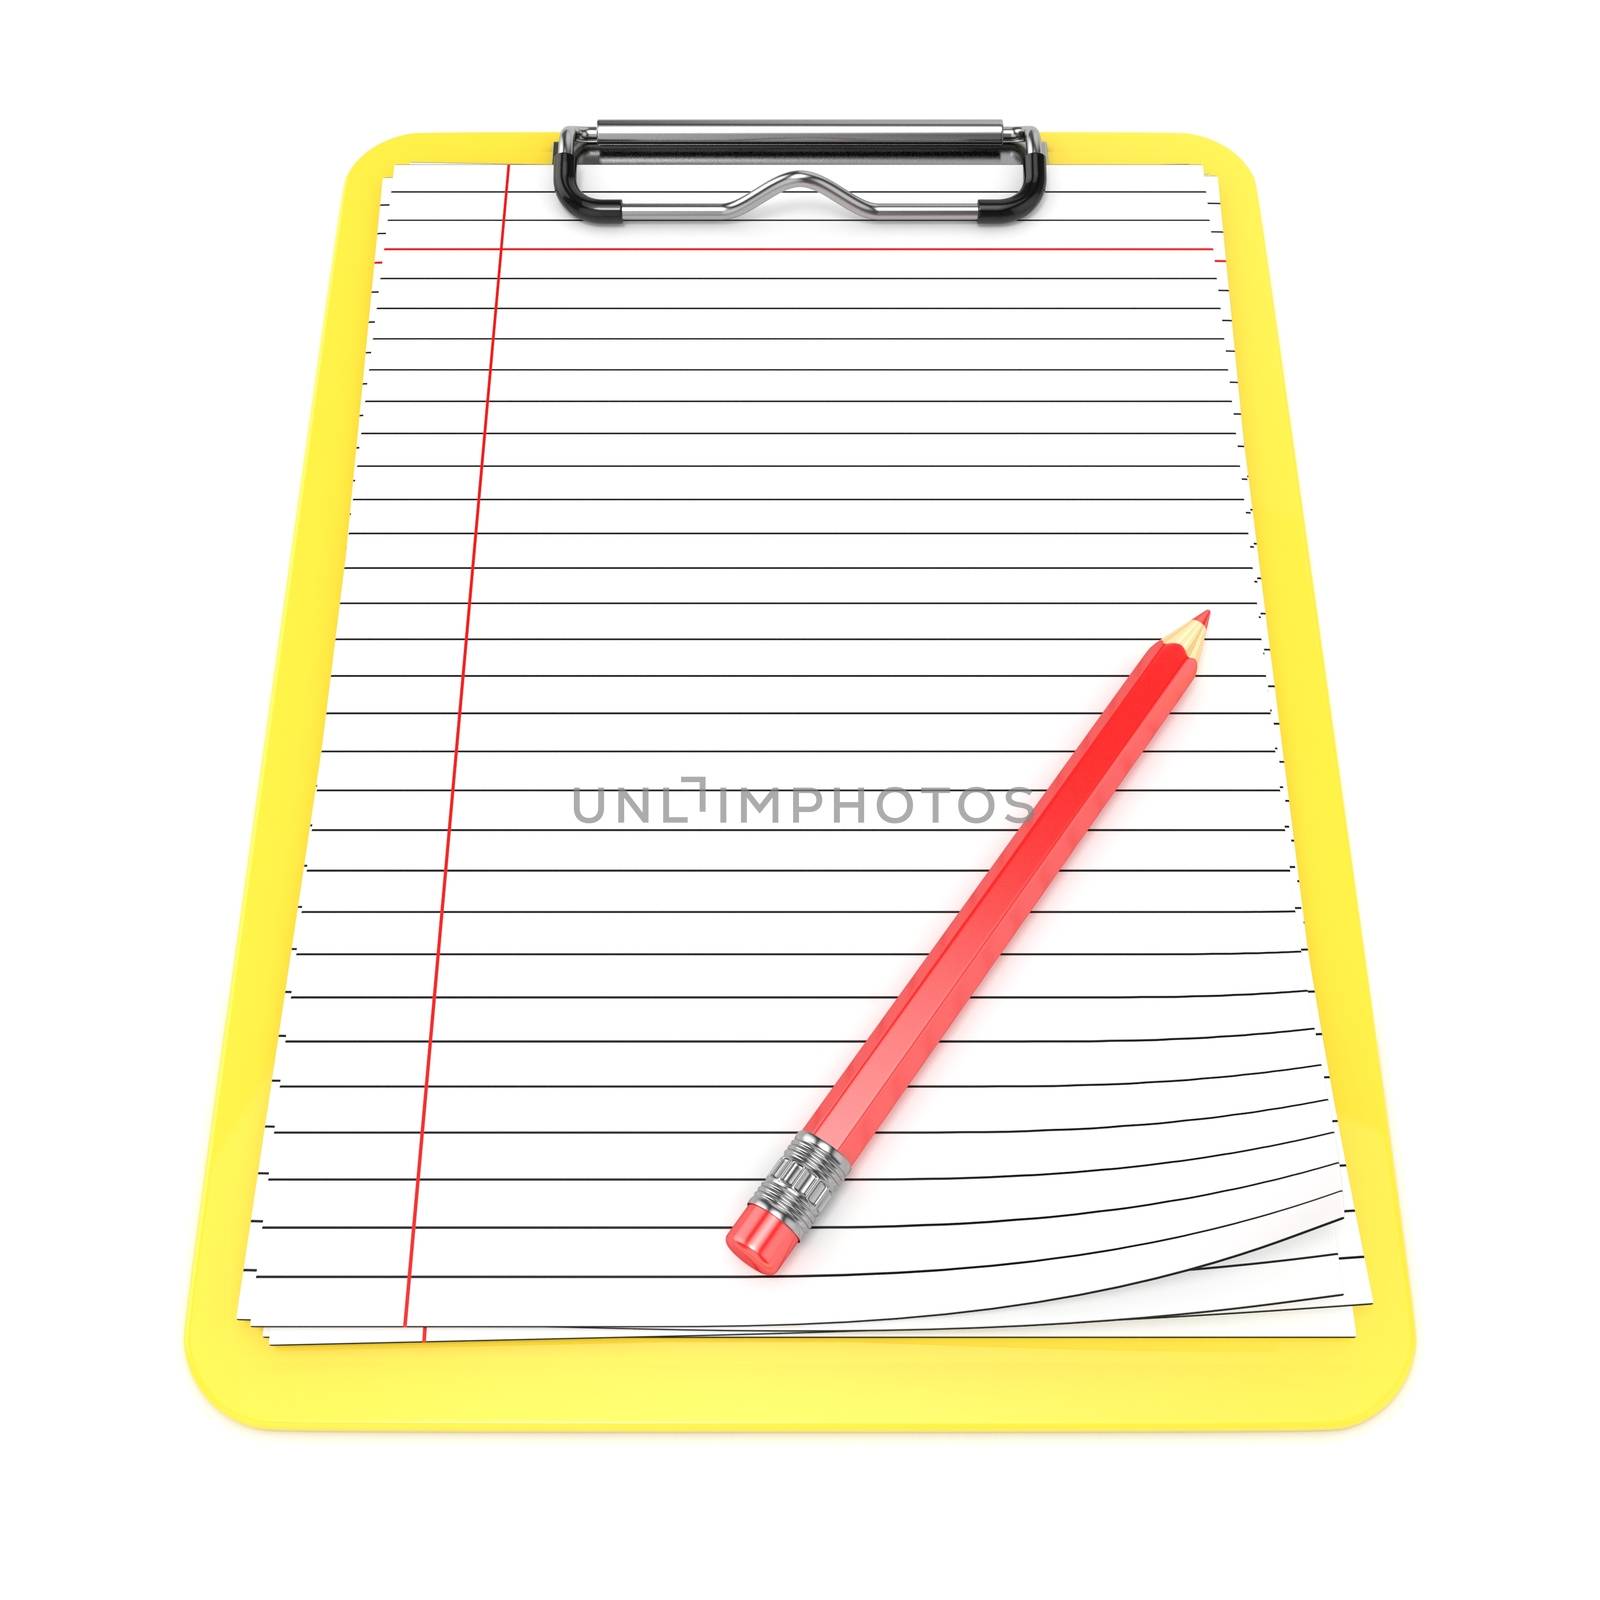 Yellow clipboard and blank lined paper. 3D render illustration isolated on white background